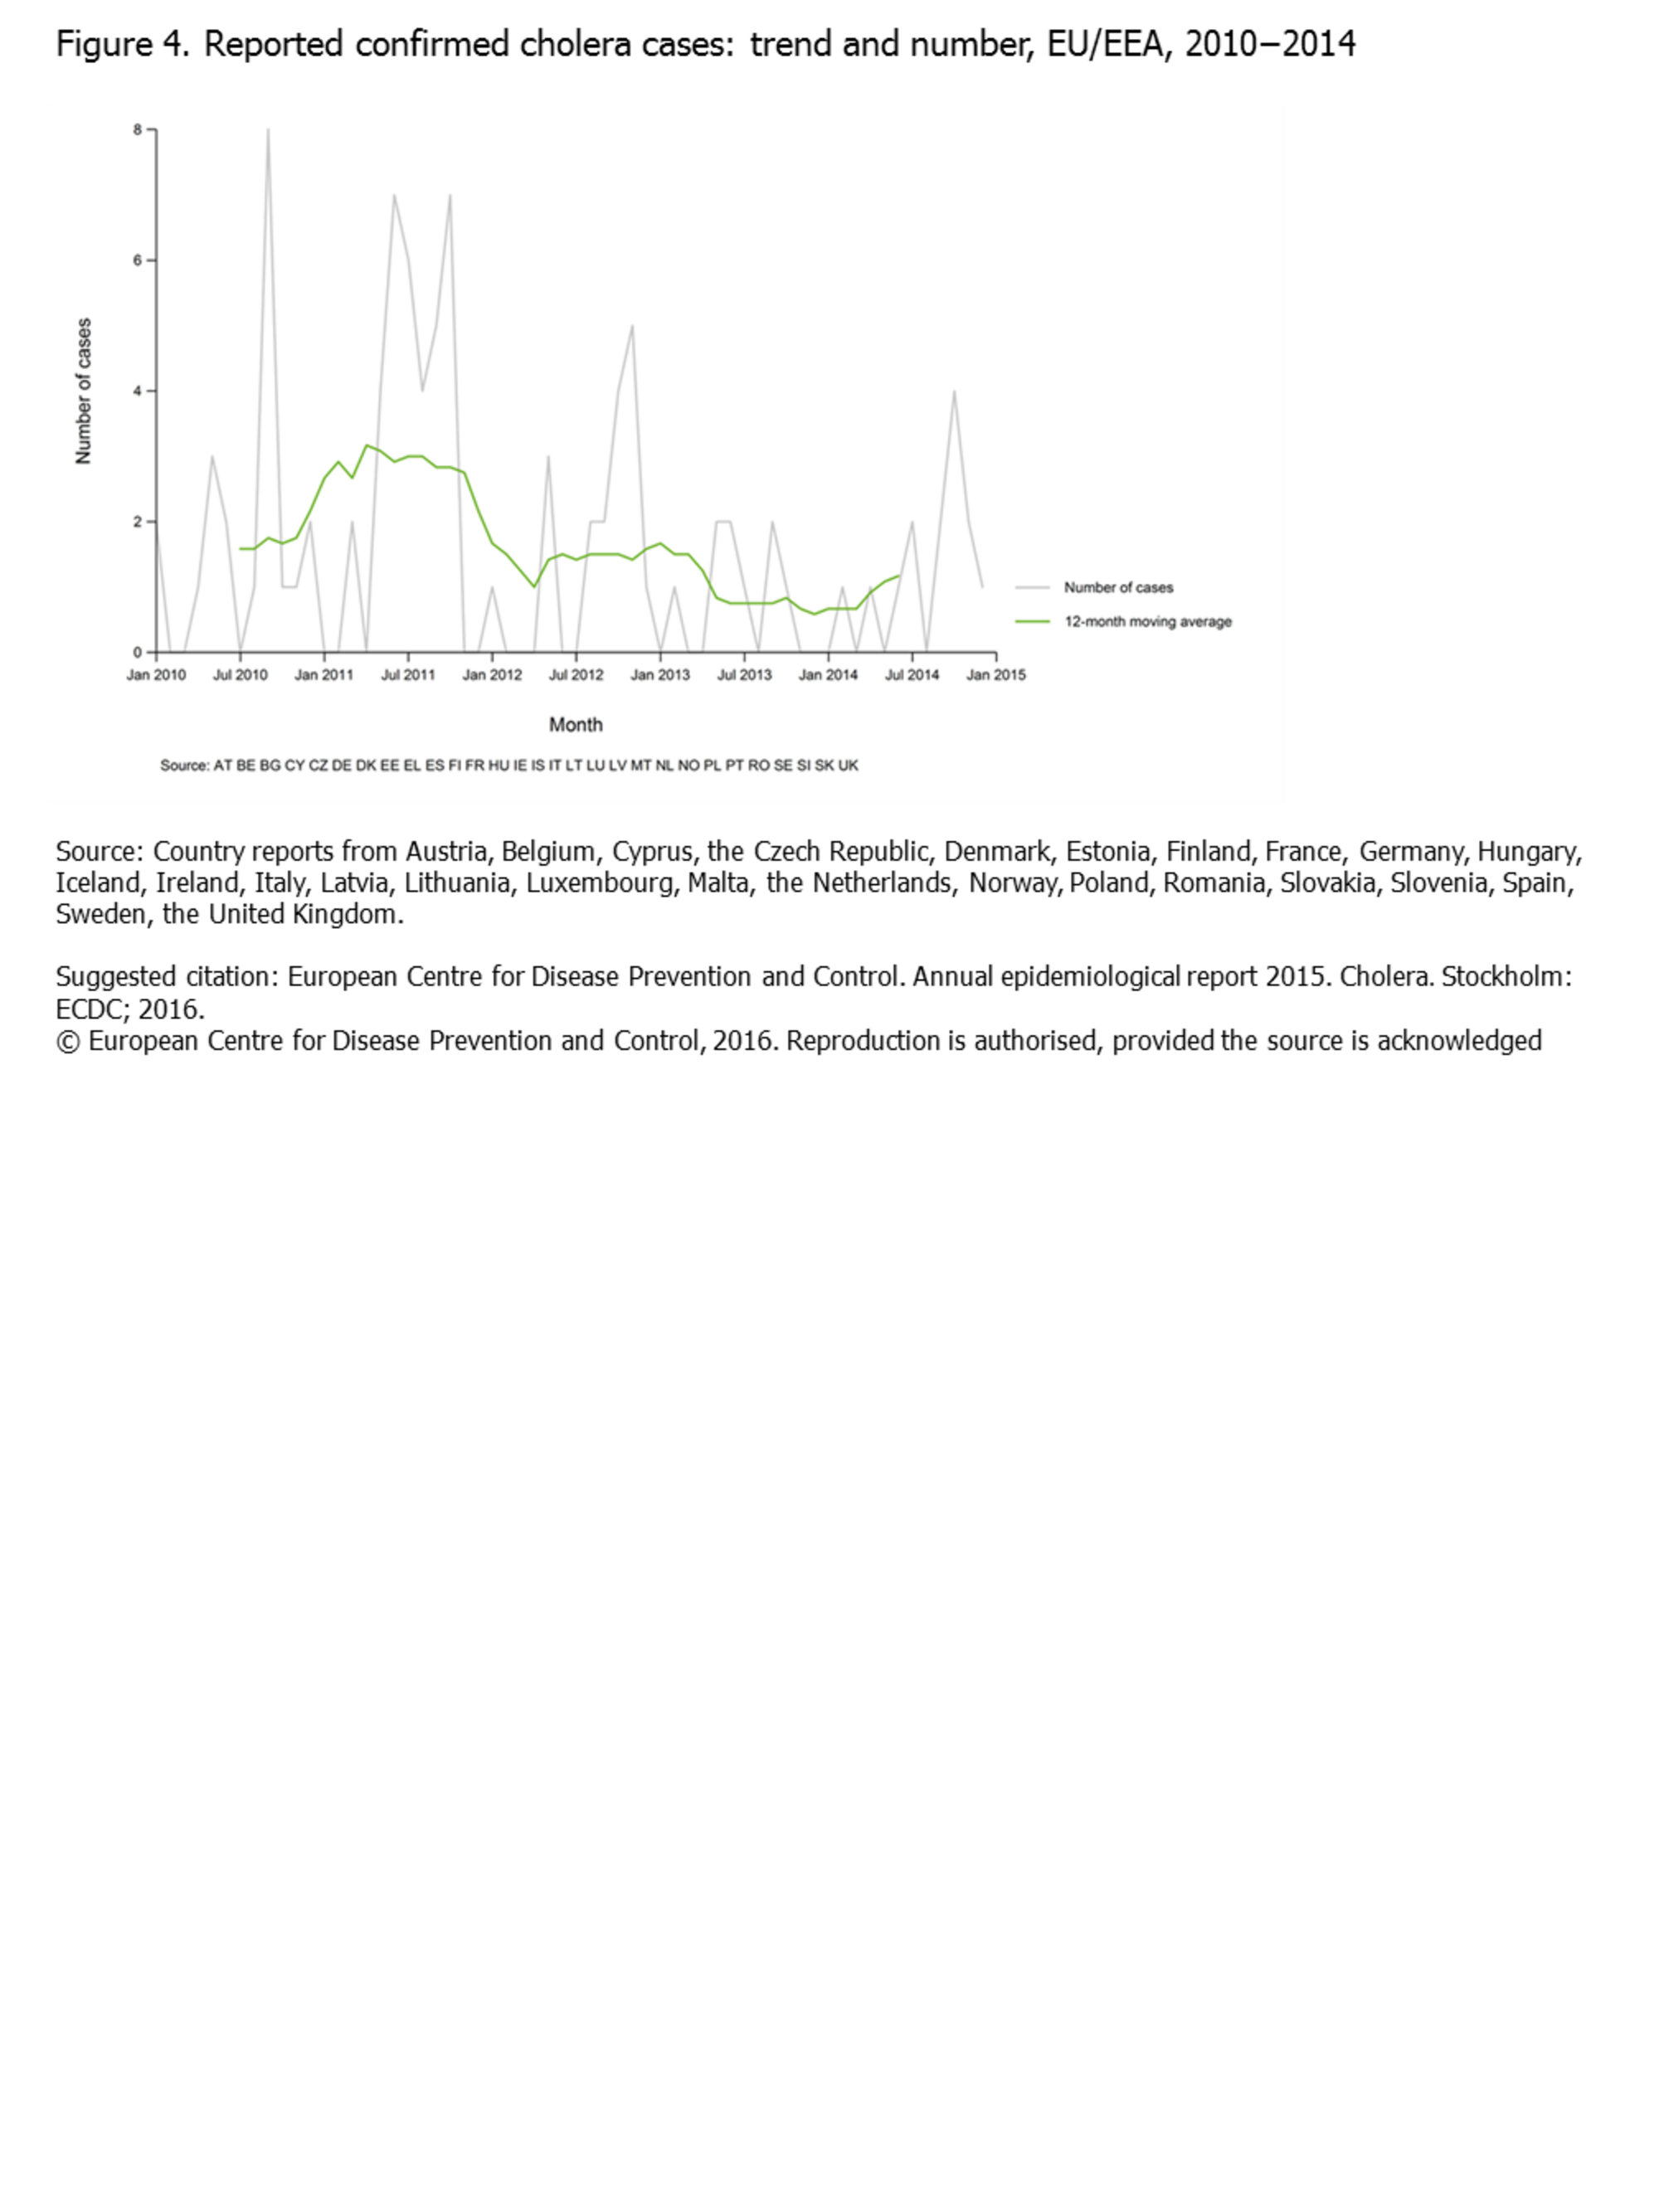 Figure 4 Reported Confirmed Cholera Cases Trend And Number Eu Eea